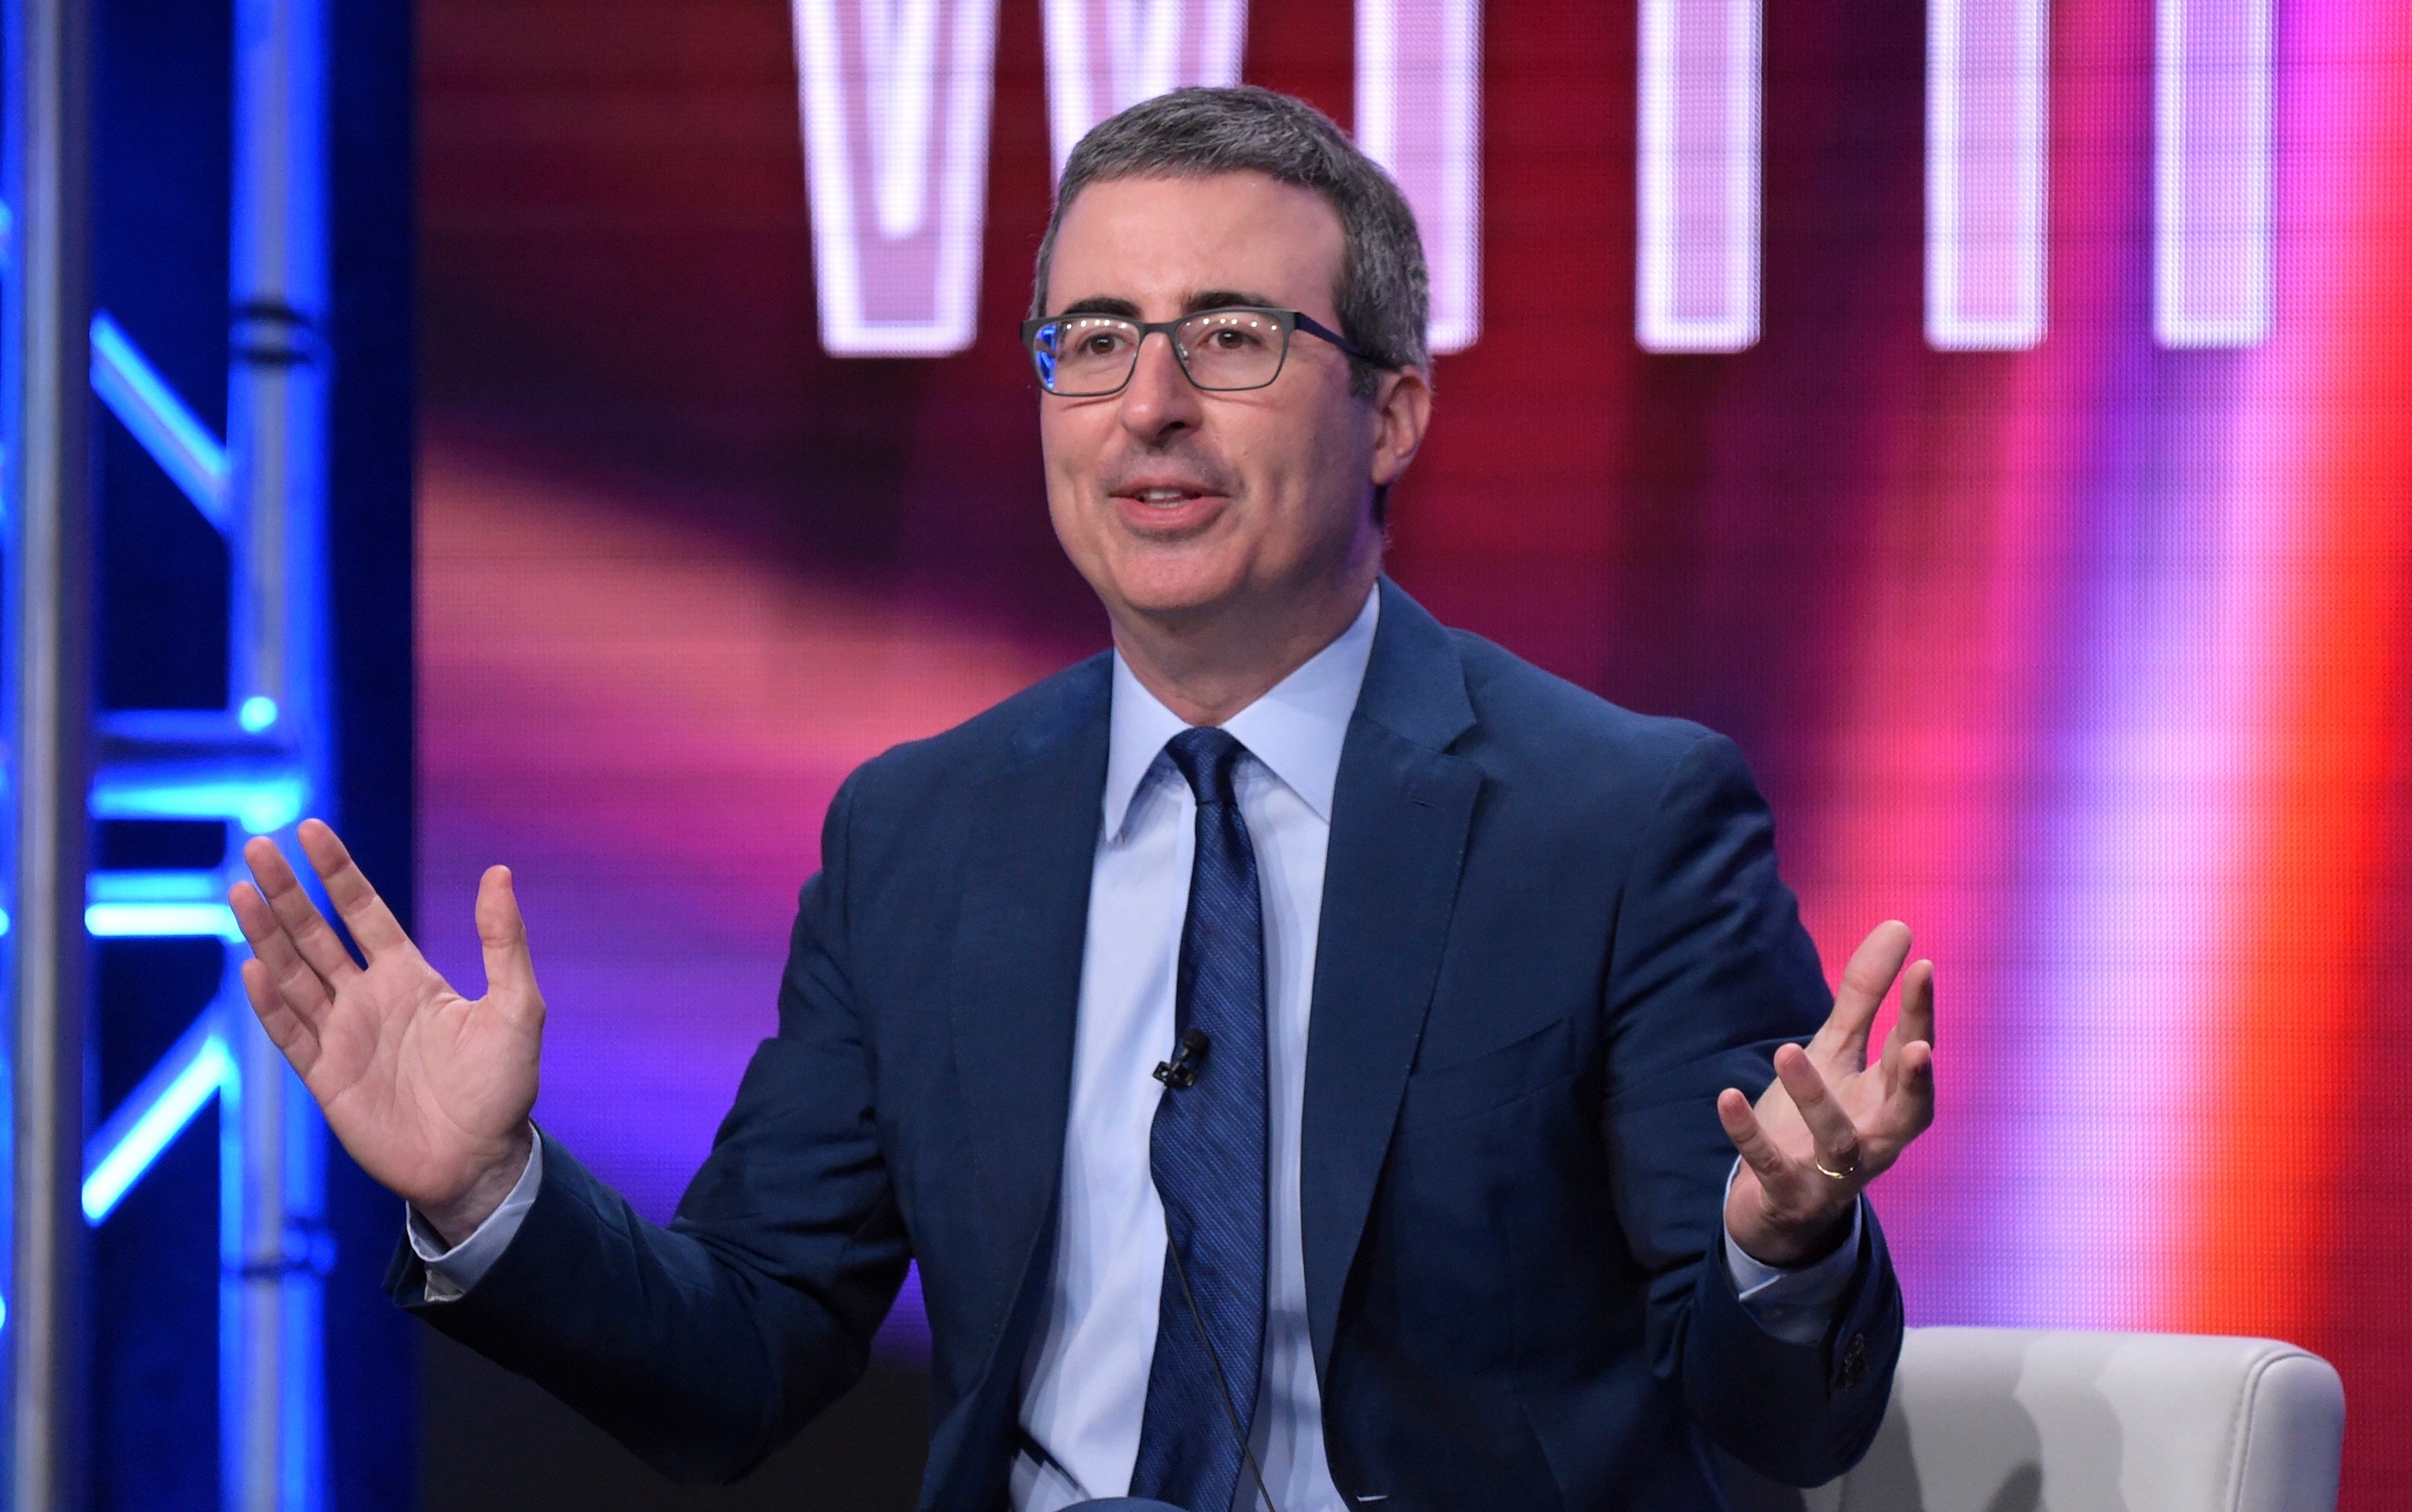 John Oliver has launched a humorous campaign for his favoured bird, the pūteketeke, on his show Last Week Tonight. Photo: Invision via AP